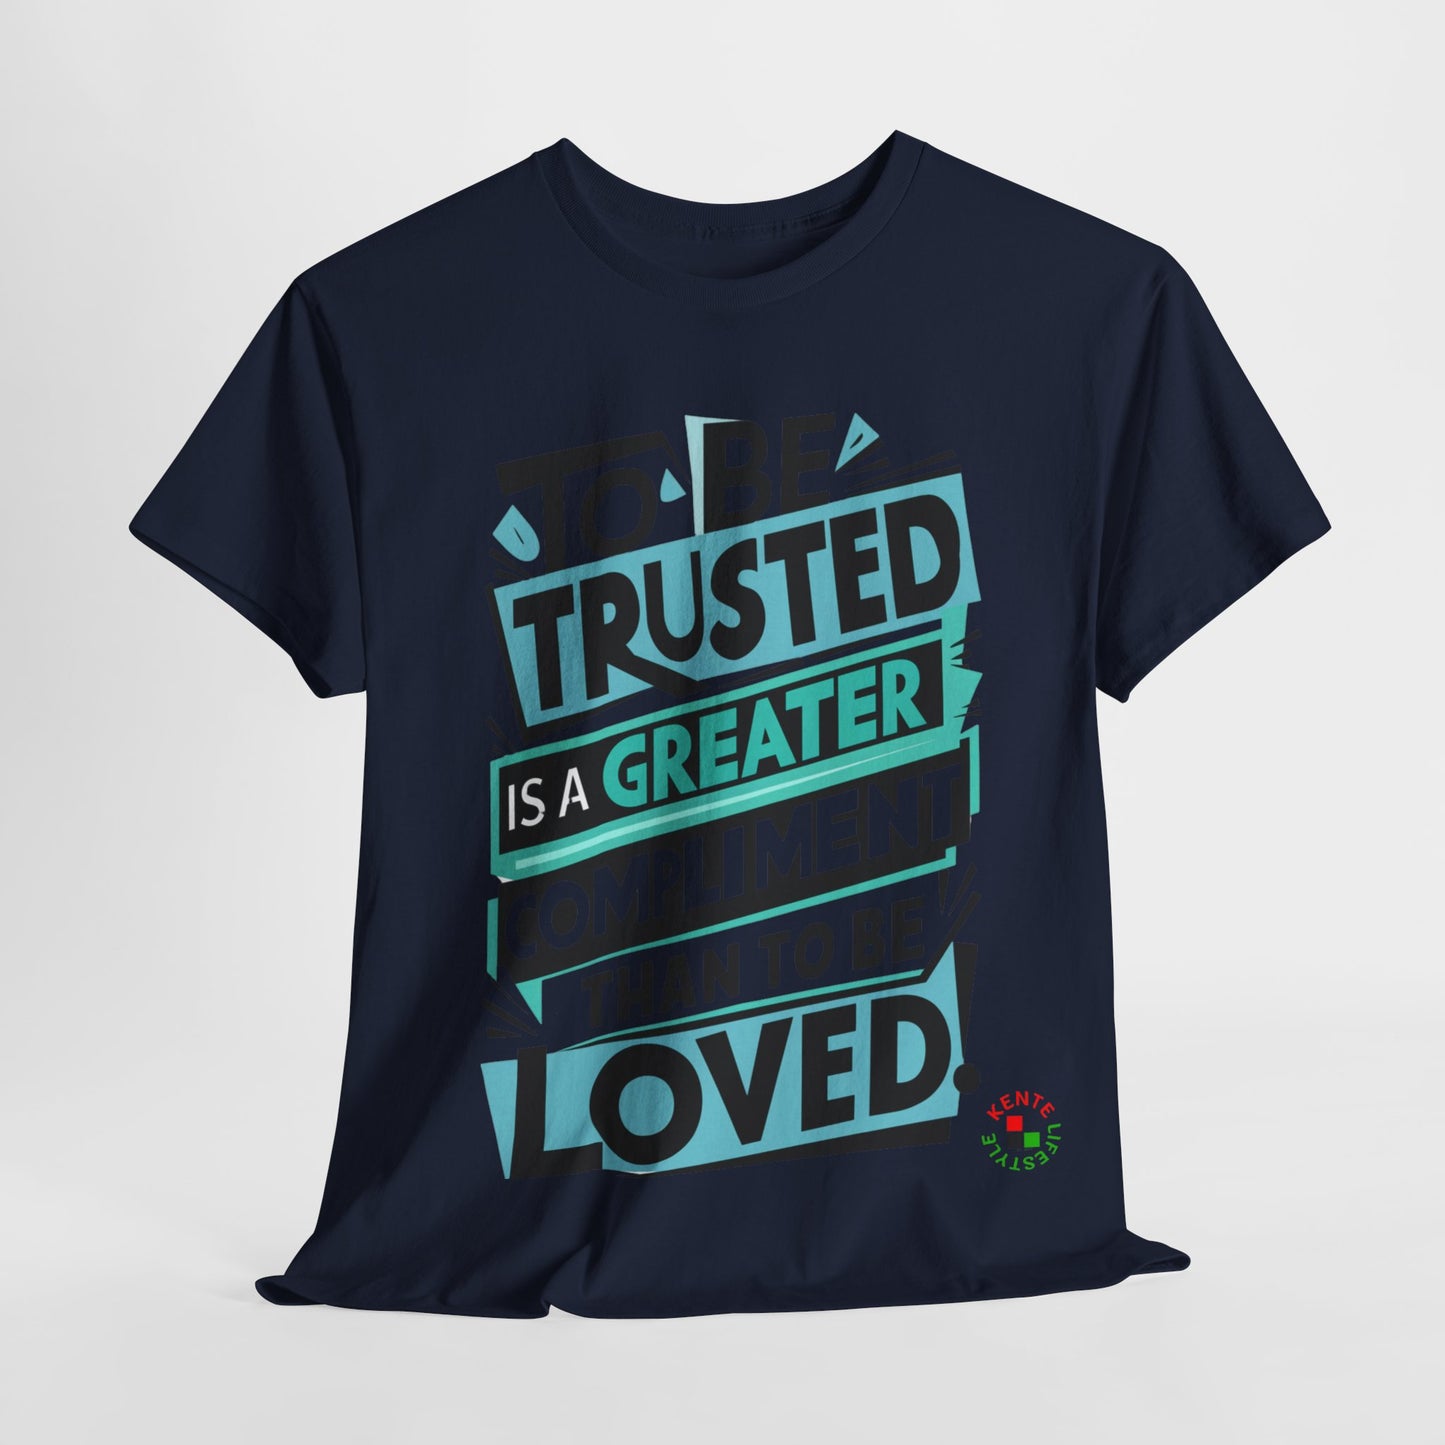 To be Trusted is a Greater Compliment than to be Loved" -- T-shirt